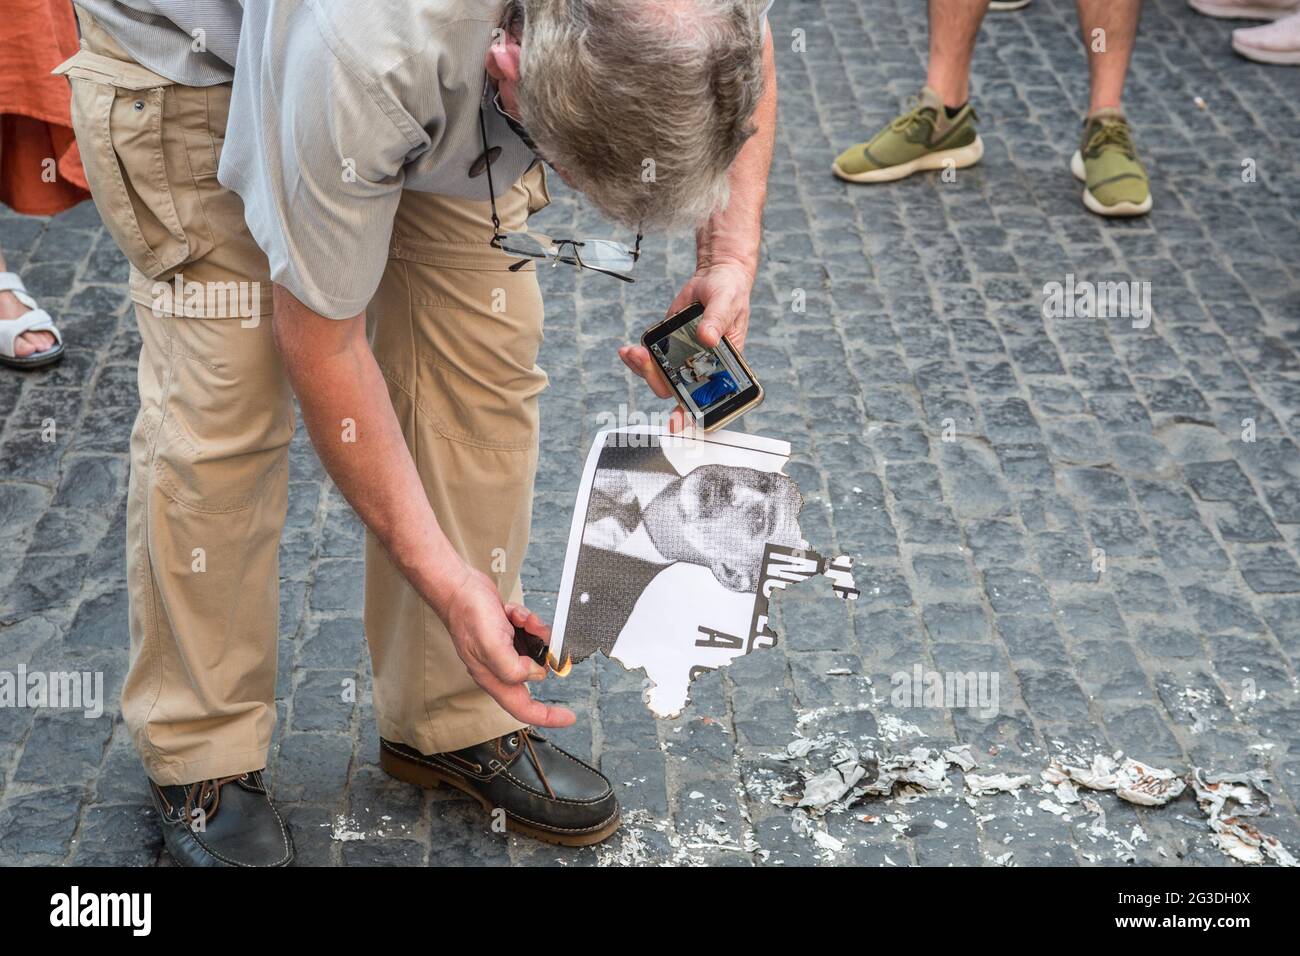 Barcelona, Spain, 15/06/2021, A protester burning photos of the Spanish king, Felipe VI, during the demonstration.The Catalan association that aims at achieving the political independence of Catalonia, the Catalan National Assembly (ANC), has called a demonstration against the visit to Catalonia of the Spanish King, Felipe VI, to attend the inaugural dinner of the XXXVI Meeting of the Barcelona business organization, Circulo de Economia (Economy Circle). The demonstration was attended by the president of the ANC, Elisenda Paluzie, who participated in the burning of photos of the monarch along  Stock Photo